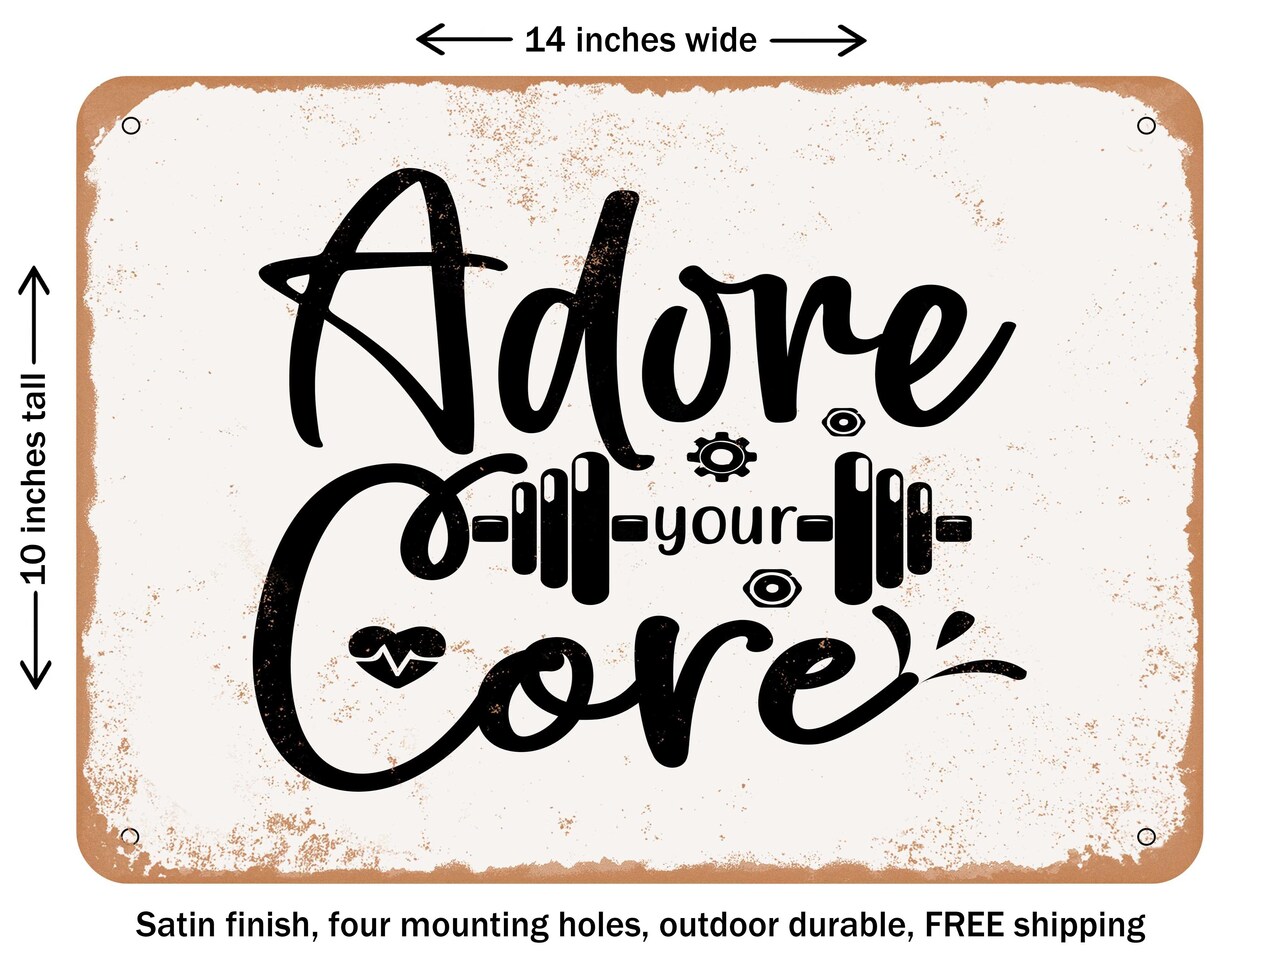 DECORATIVE METAL SIGN - Adore Your Core - Vintage Rusty Look